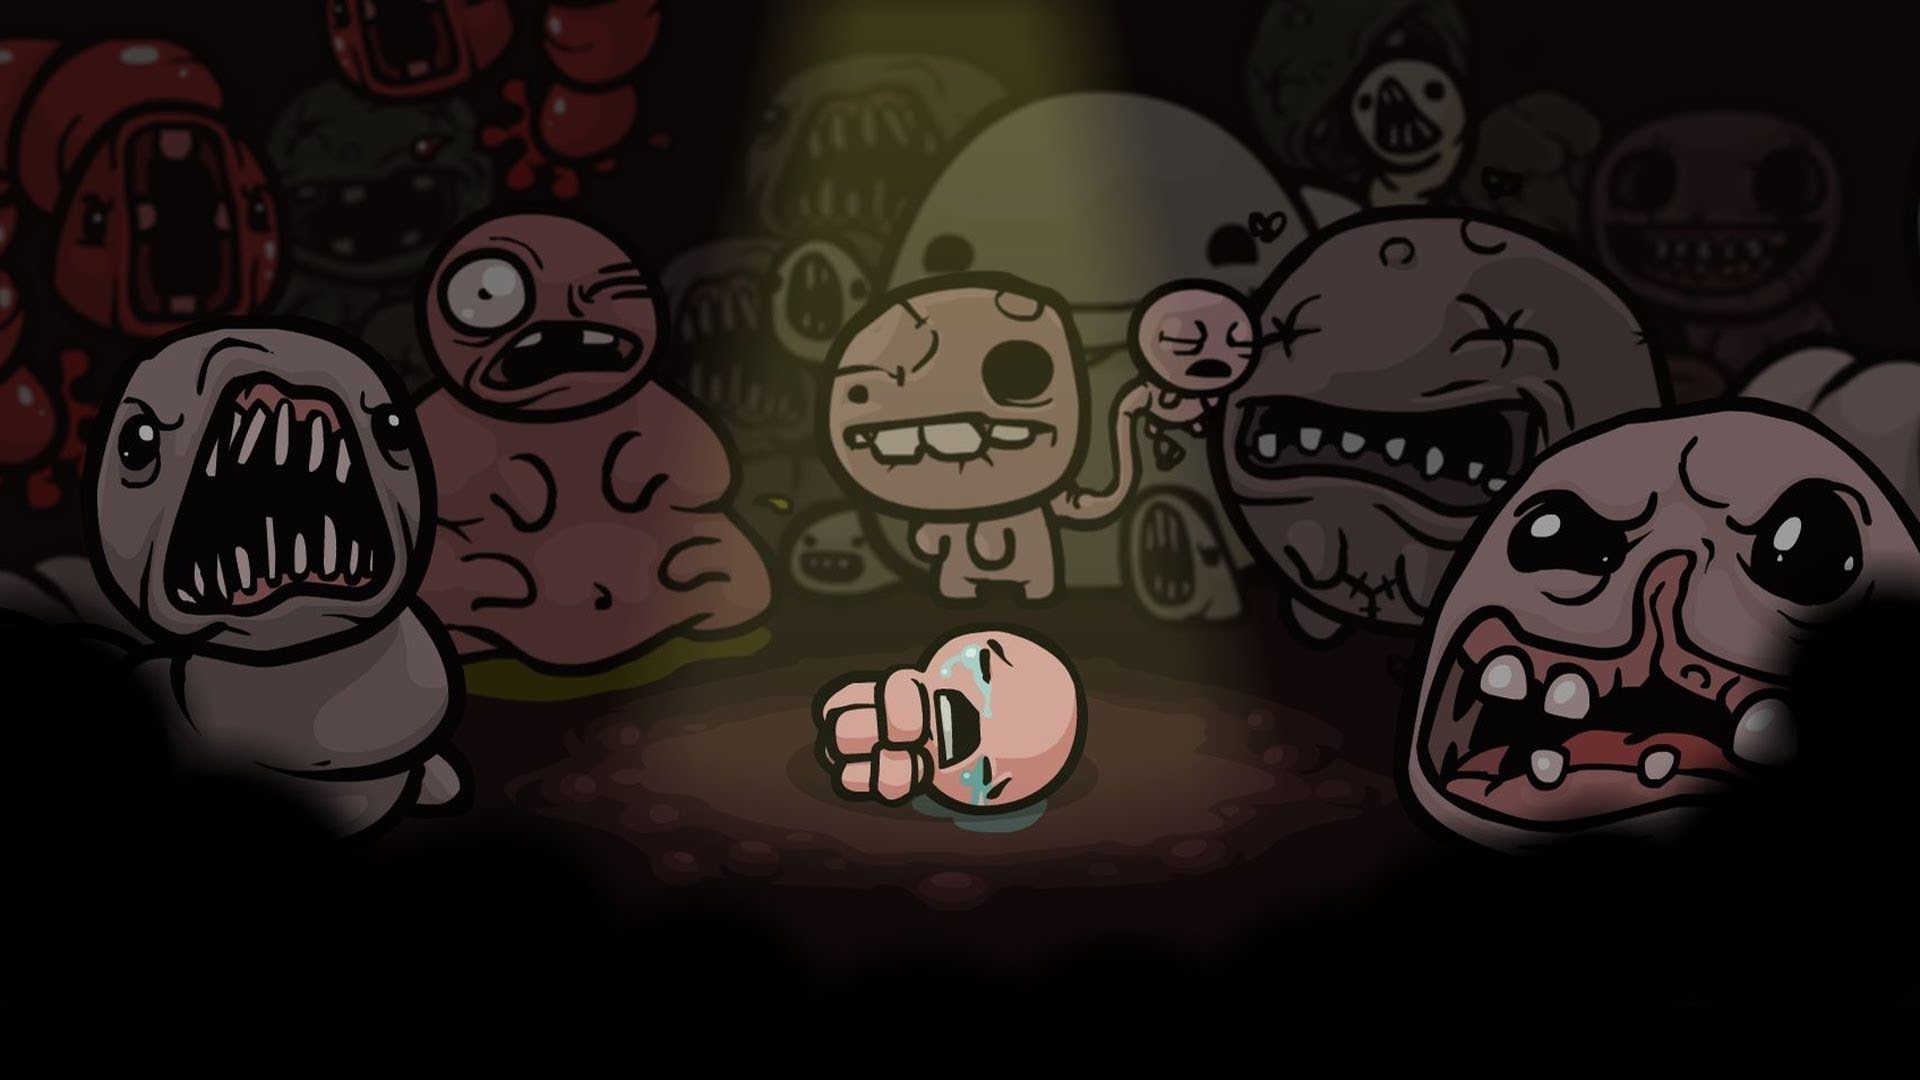 the binding of isaac rebirth torrent